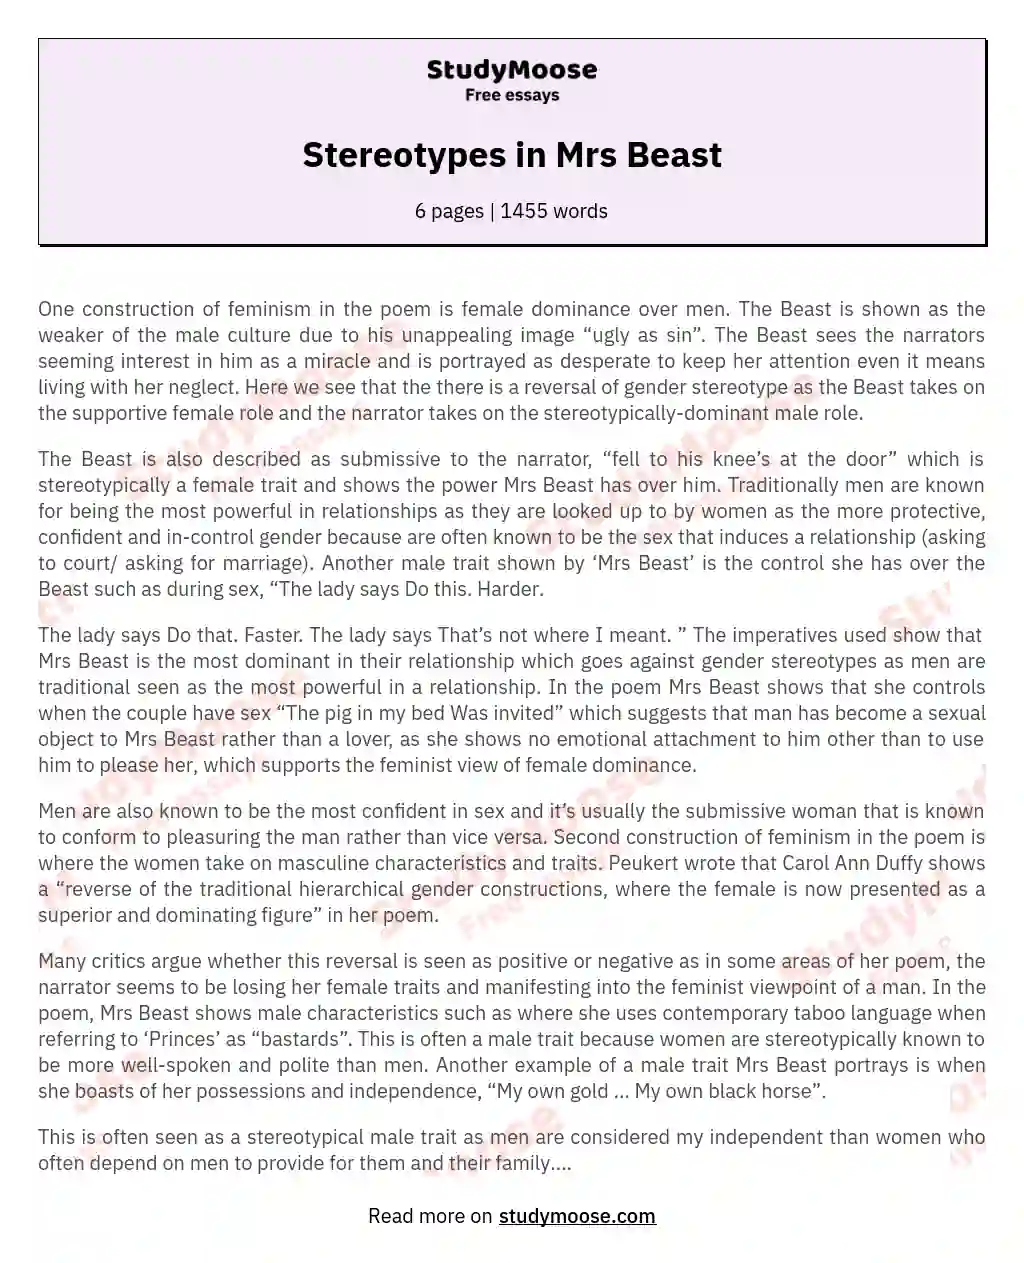 Stereotypes in Mrs Beast essay